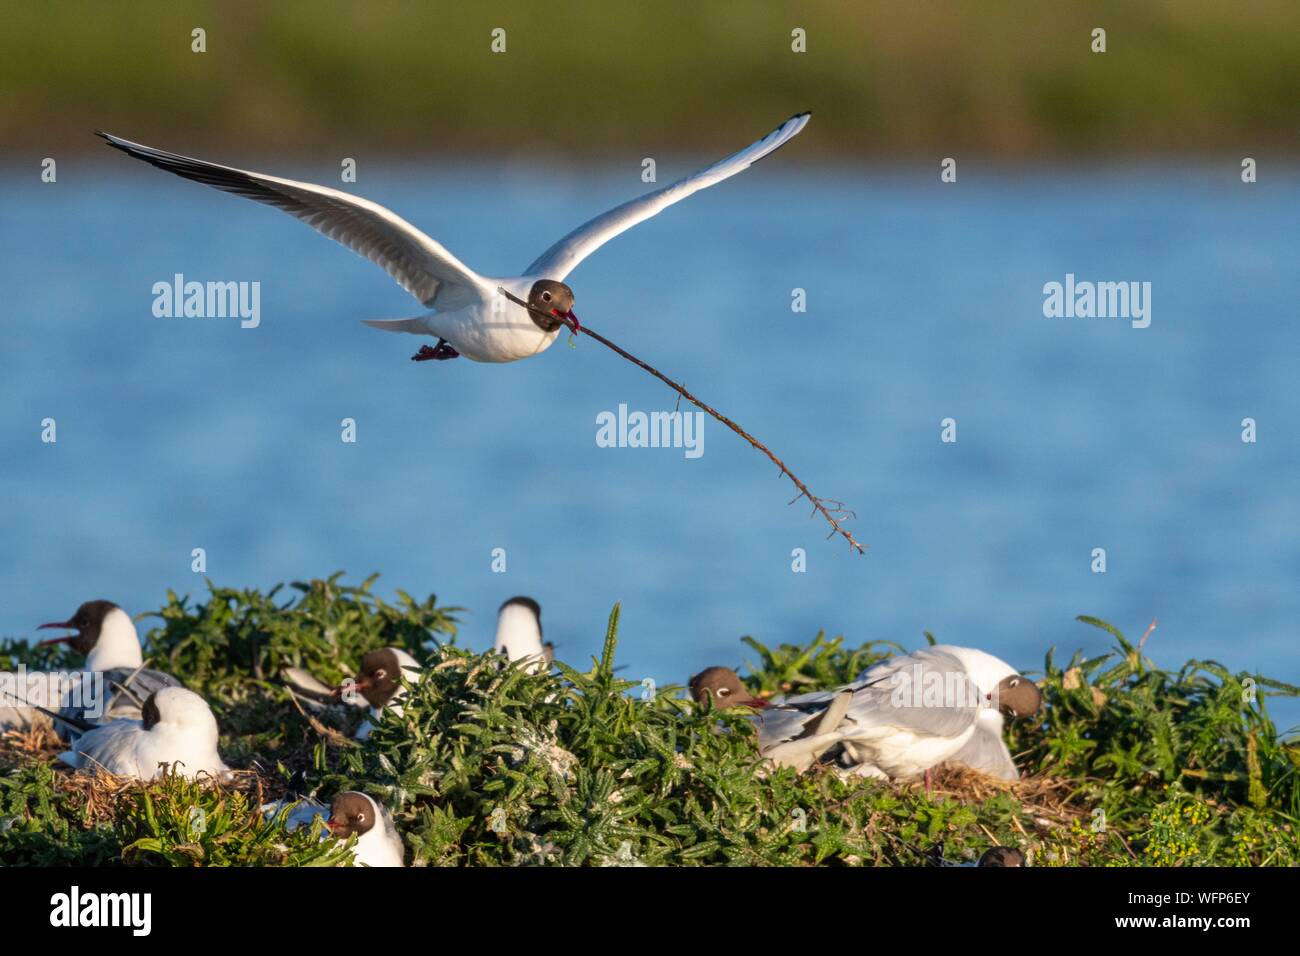 France, Somme, Baie de Somme, Le Crotoy, The marsh of Crotoy welcomes each year a colony of Black-headed Gull (Chroicocephalus ridibundus - Black-headed Gull) which come to nest and reproduce on islands in the middle of the ponds, seagulls then chase materials for the construction of nests Stock Photo